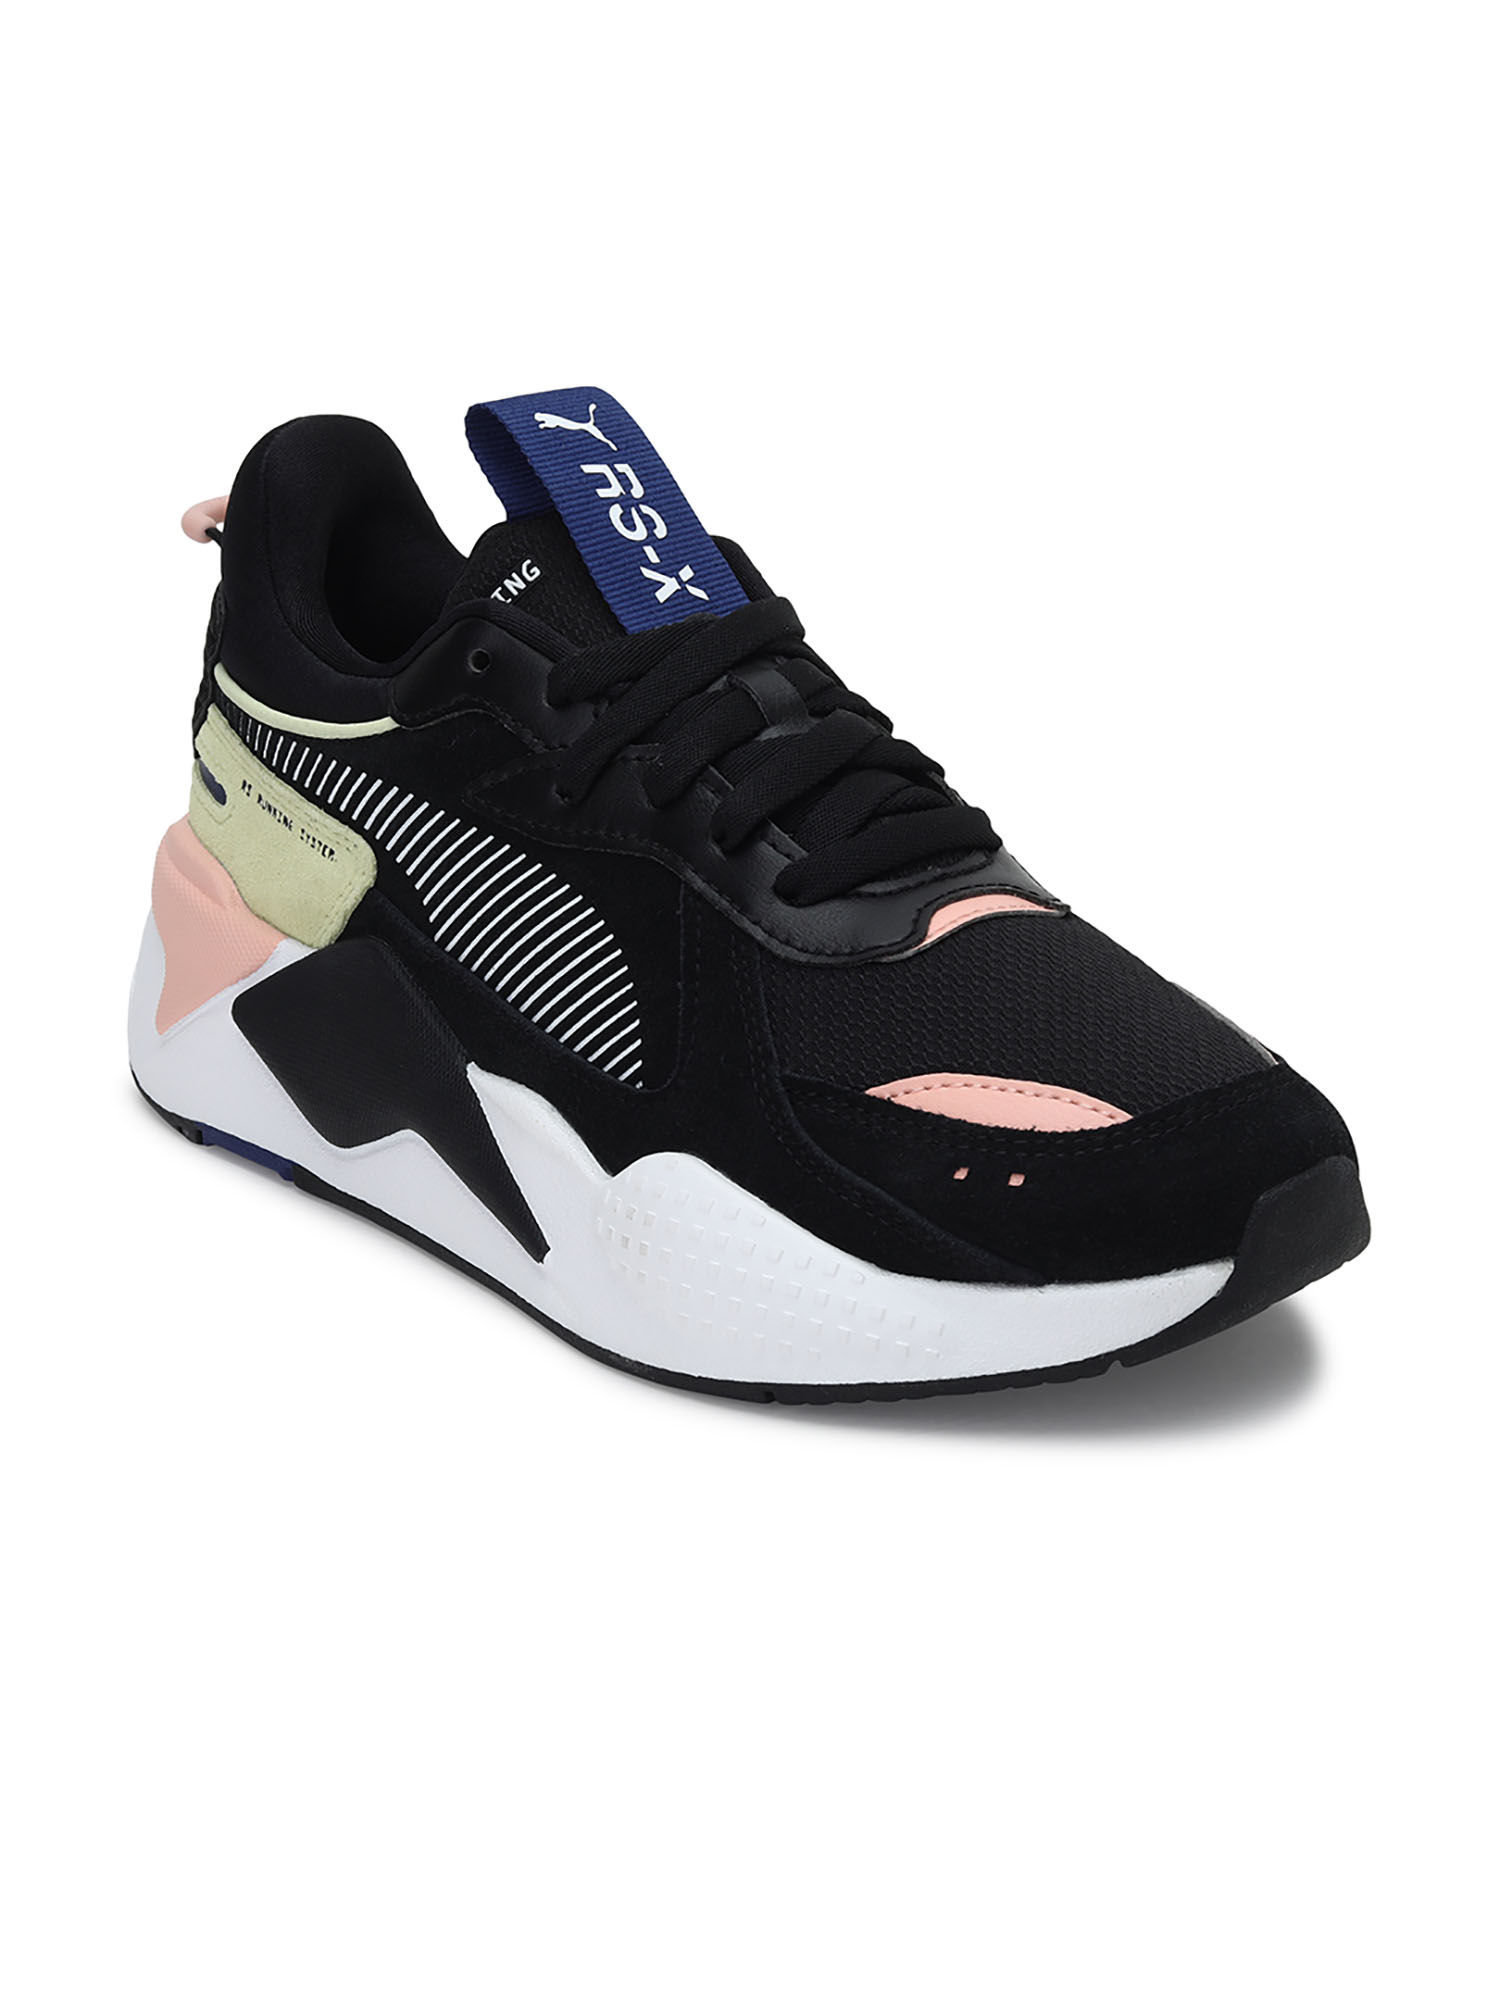 Puma Brand Womens RS-Z Reinvent Casuals Sneakers Sports Shoes 383219 06  (White/Peach/Pink) :: RAJASHOES